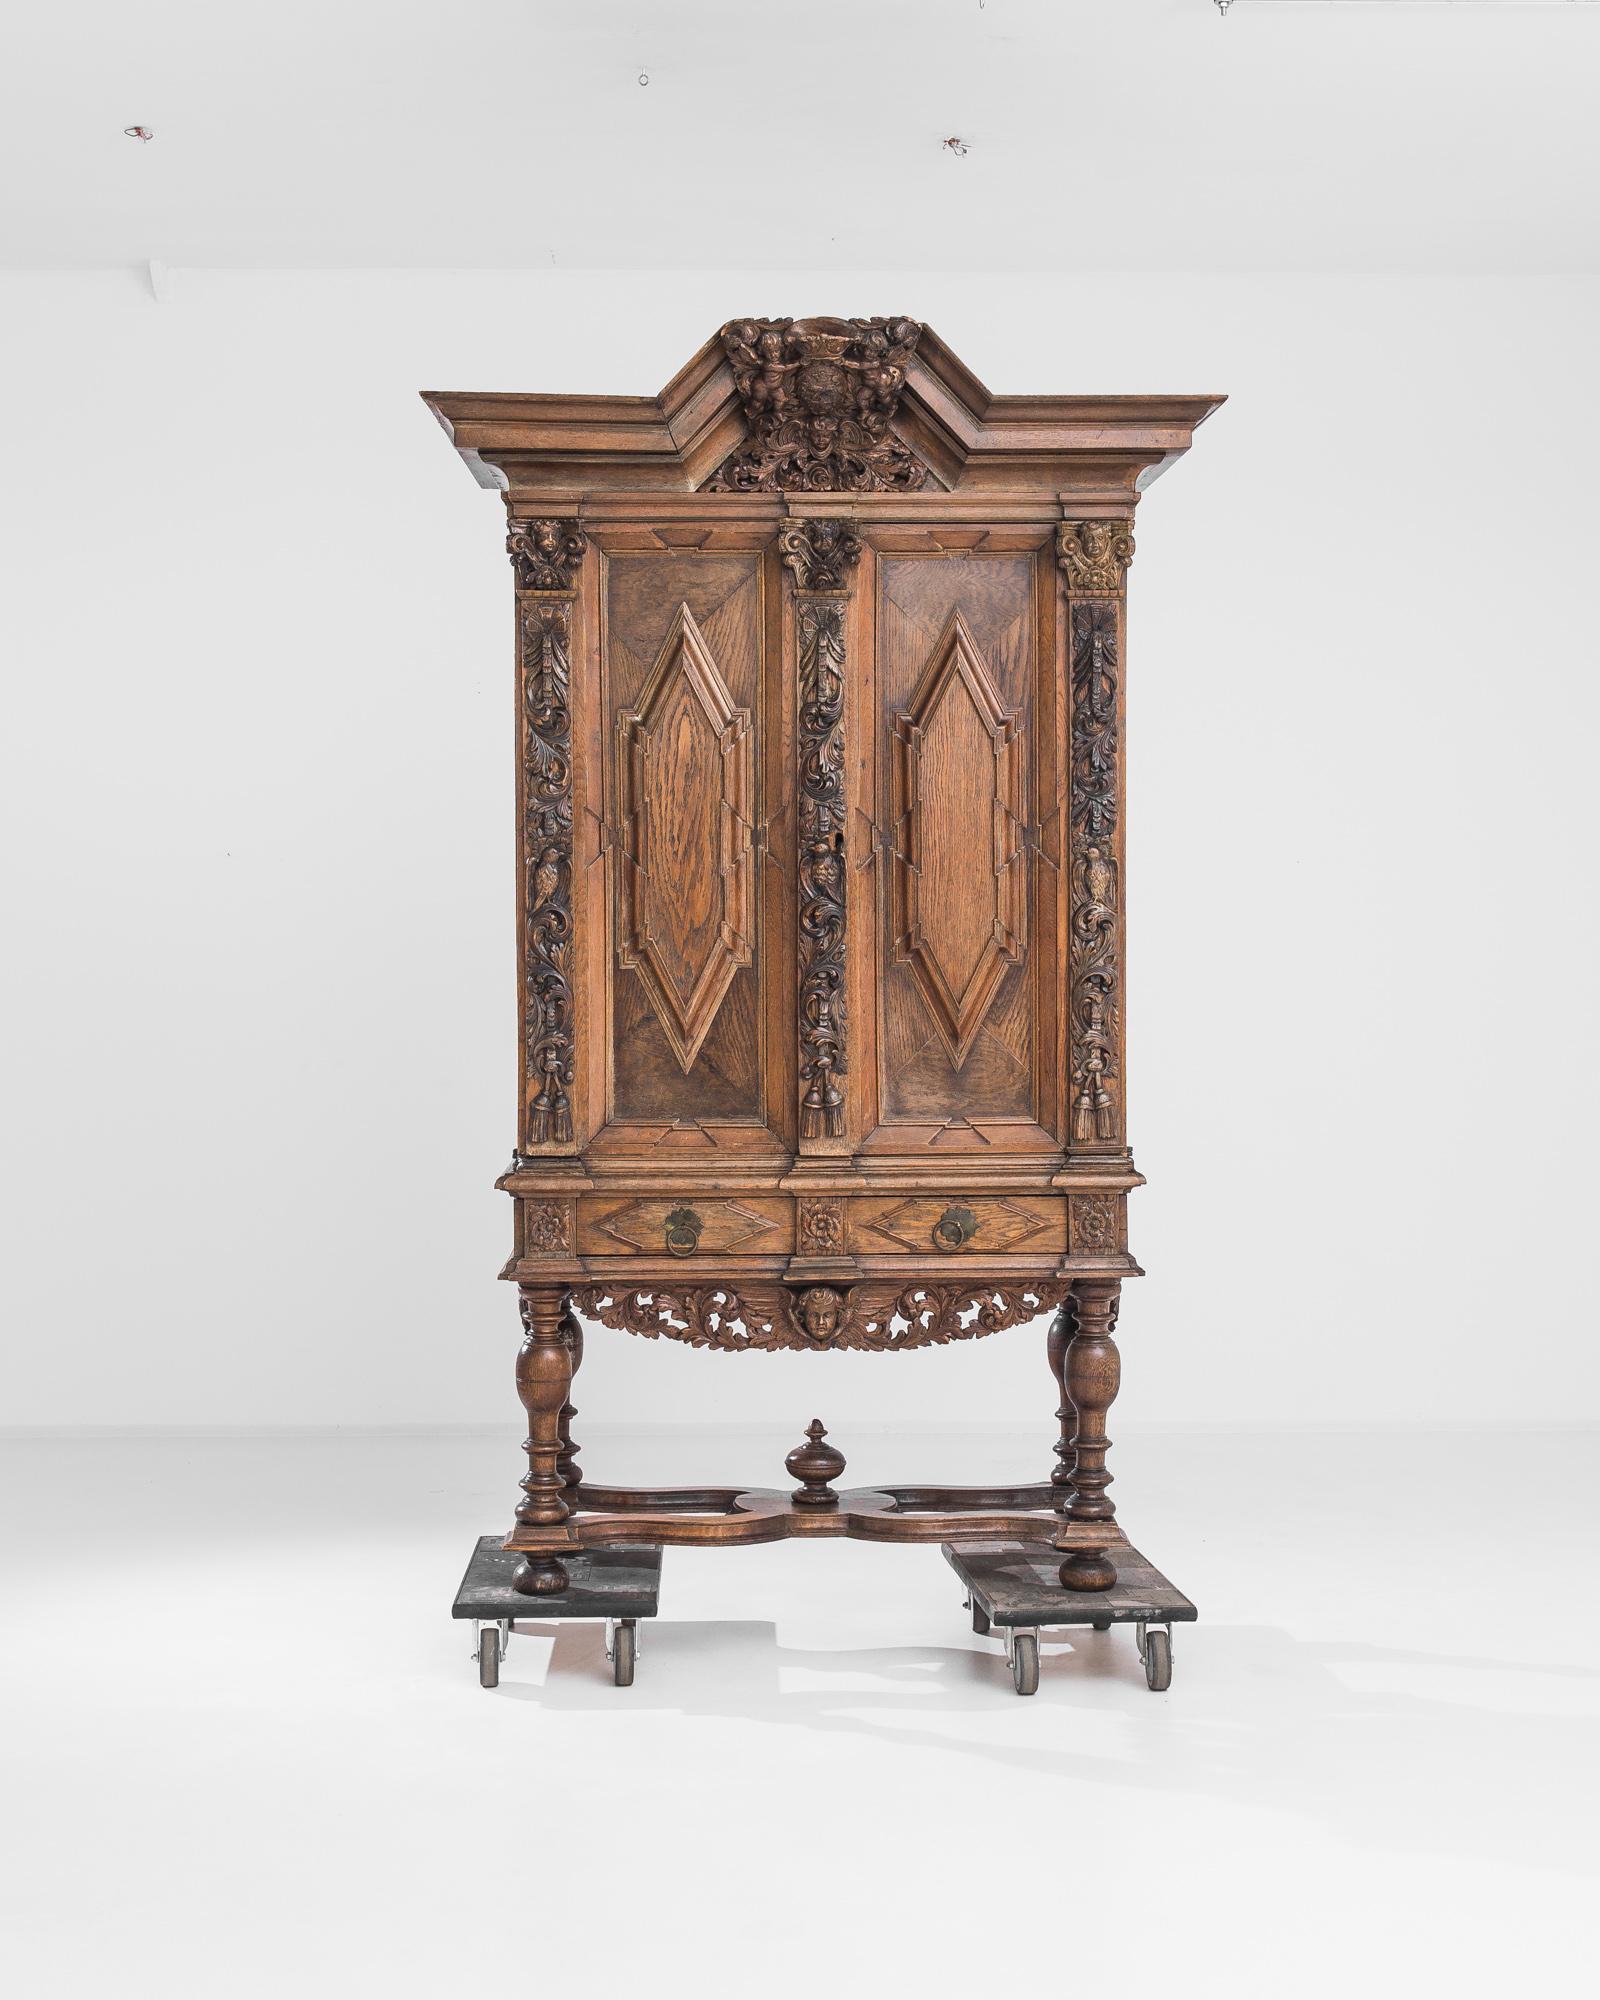 Magnificent carving makes this antique wooden cabinet a truly covetable acquisition. Made in the Netherlands in the 1780s, the piece is dressed in its original finish, a vivid auburn color enlivened by a rich polish. Carved cherubs and songbirds